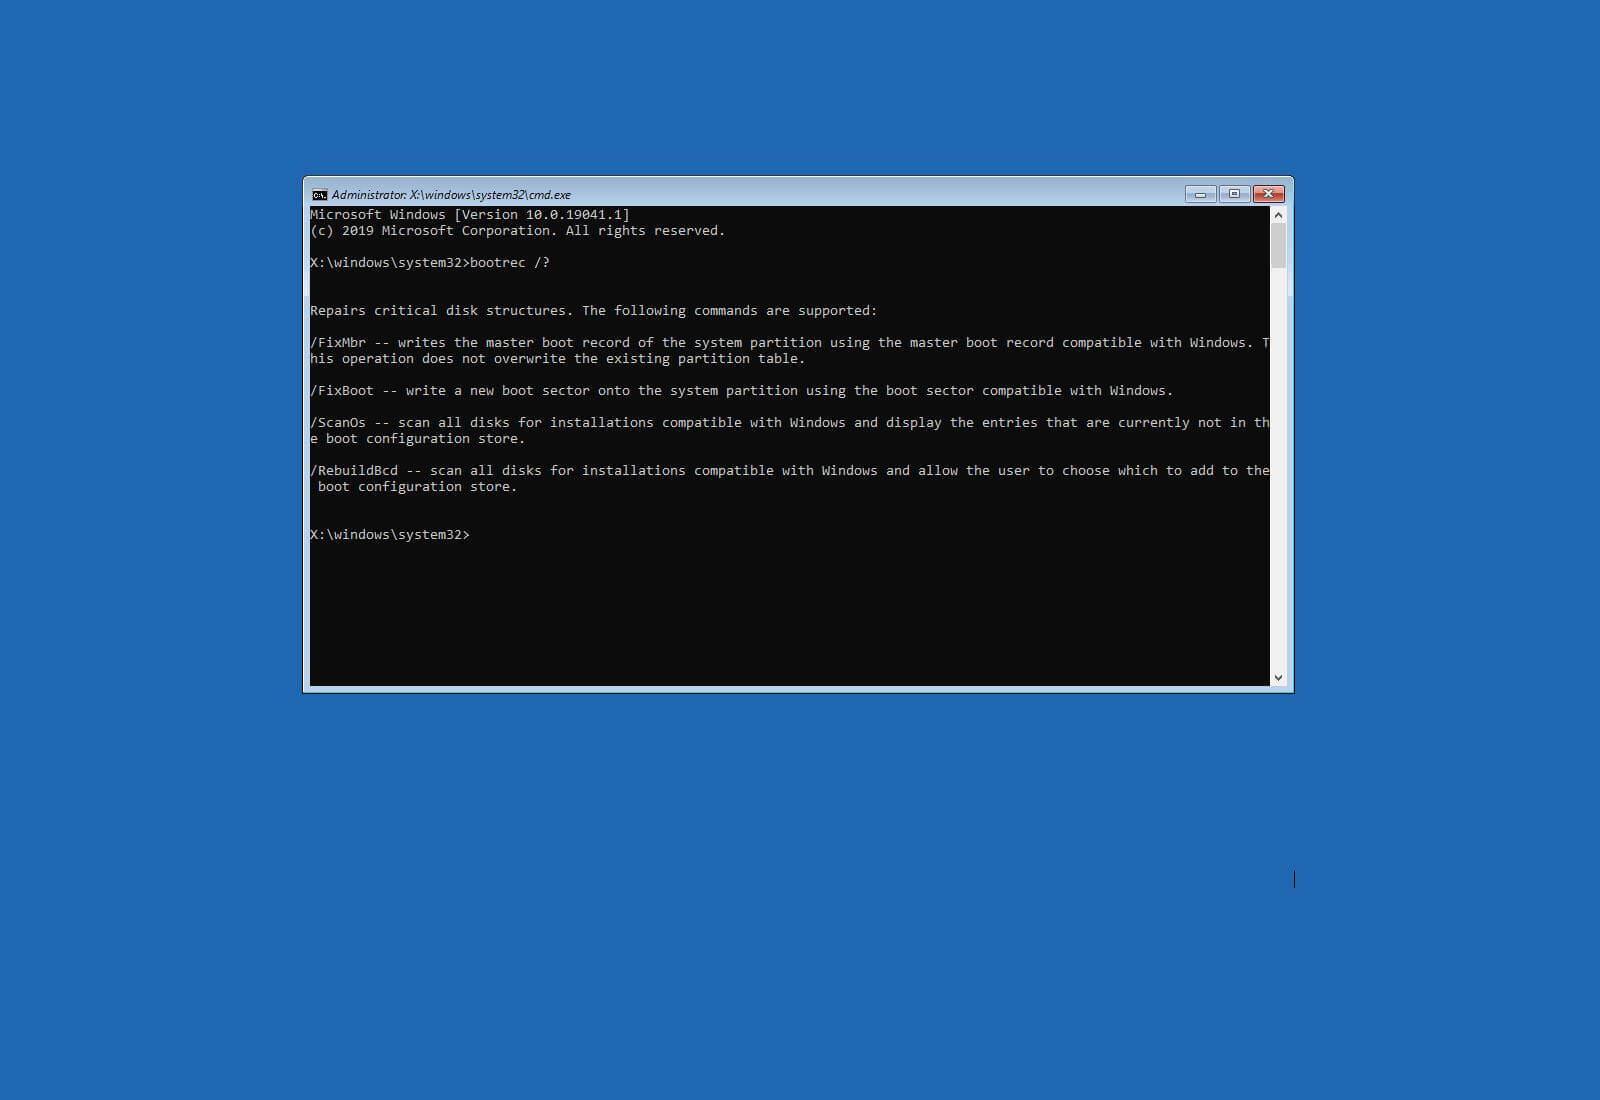 Repairing the Master Boot Record (MBR)
Using Windows Startup Repair to fix boot issues